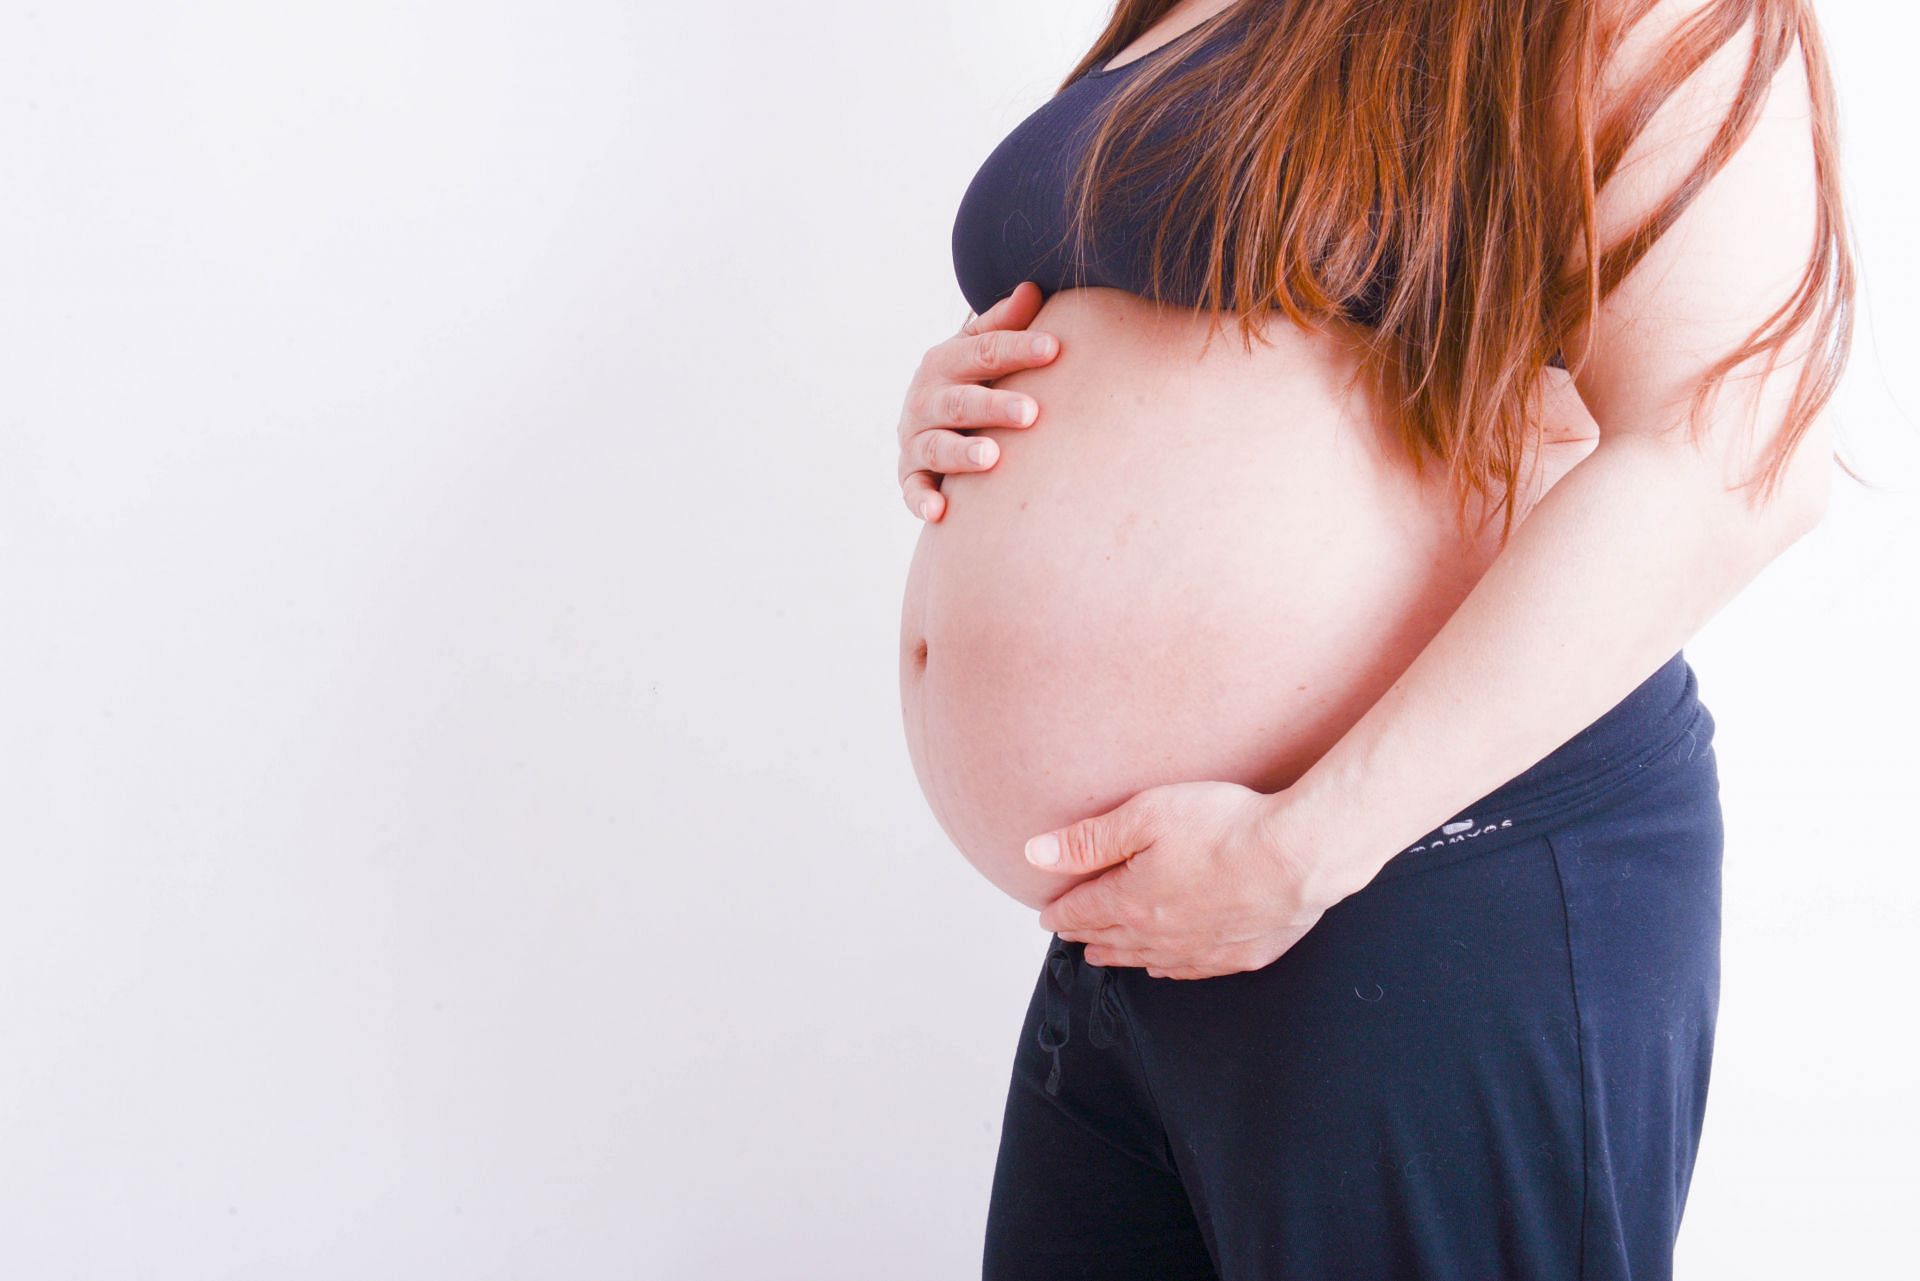 Baby weight is a natural gain of adipose tissues during pregnancy. (Image via Unsplash/Anna Civolani)